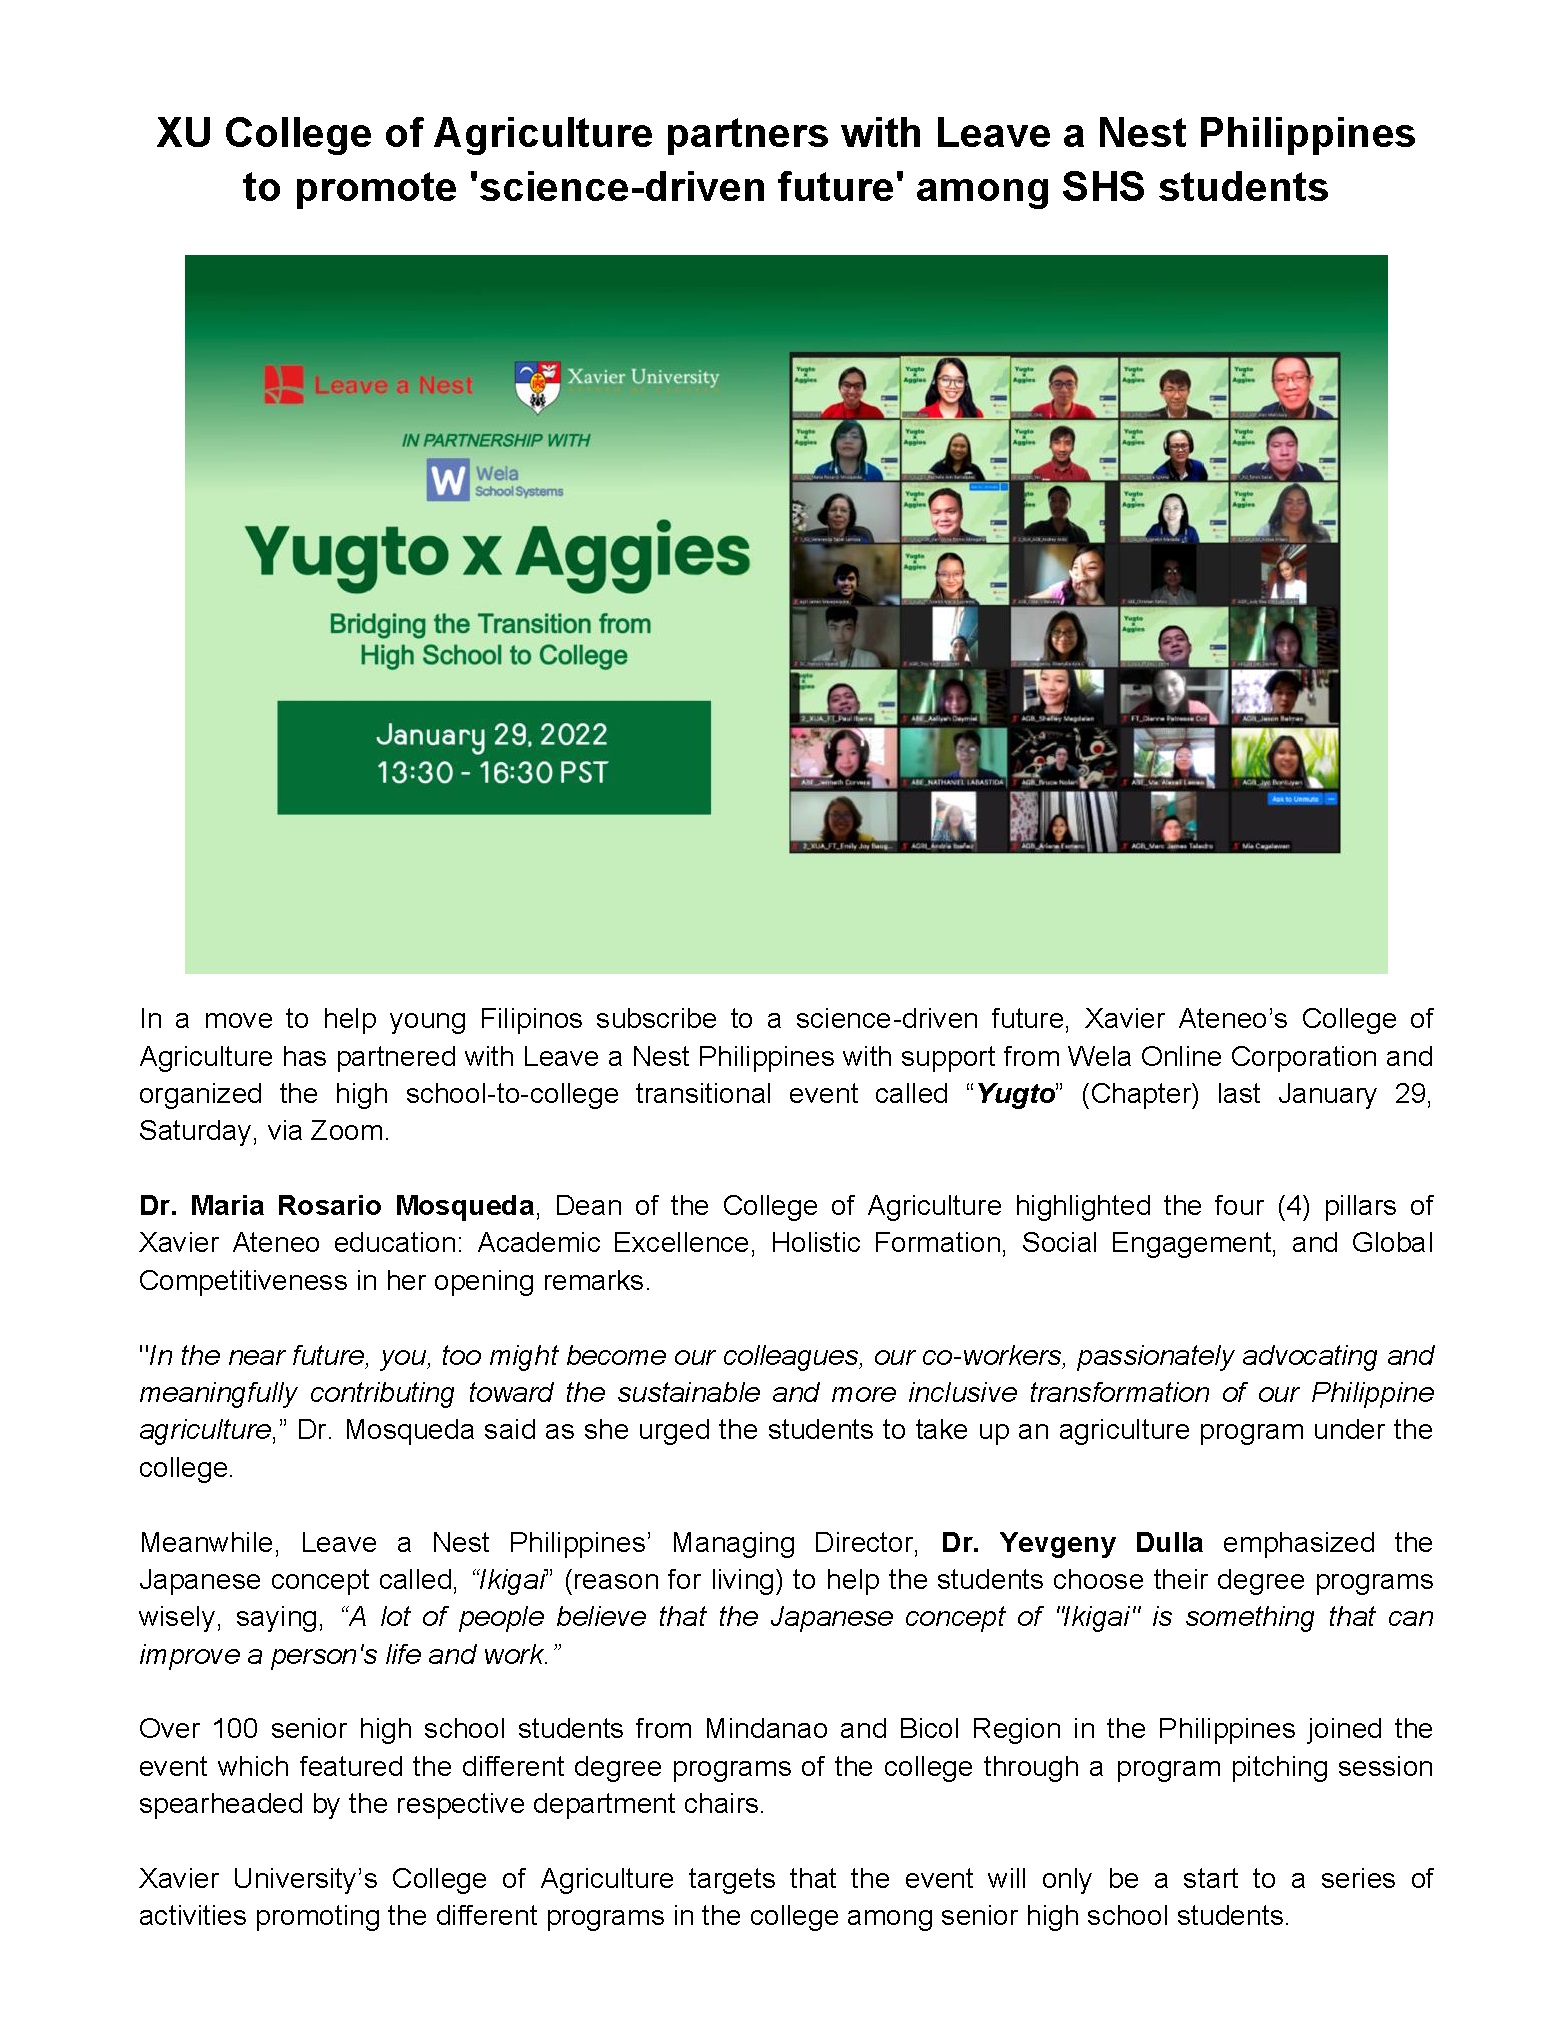 20220211 Yugto Post event News Release Revised for XUCA